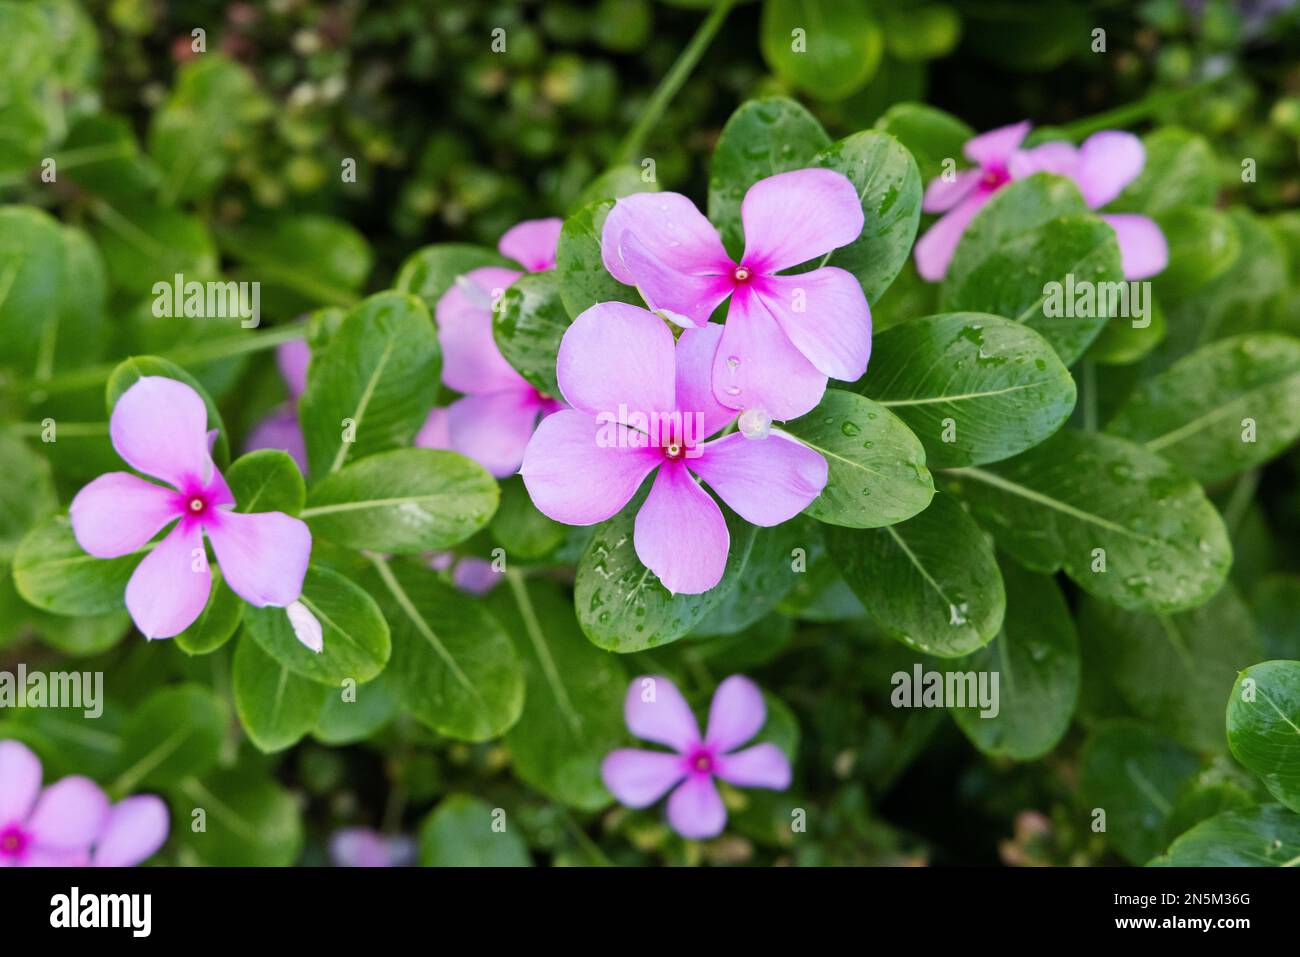 Catharanthus Roseus aka. Madagascar Periwinkle or Rose periwinkle, pink periwinkle flower, these flowers growing in the tropics, in the Maldives Stock Photo